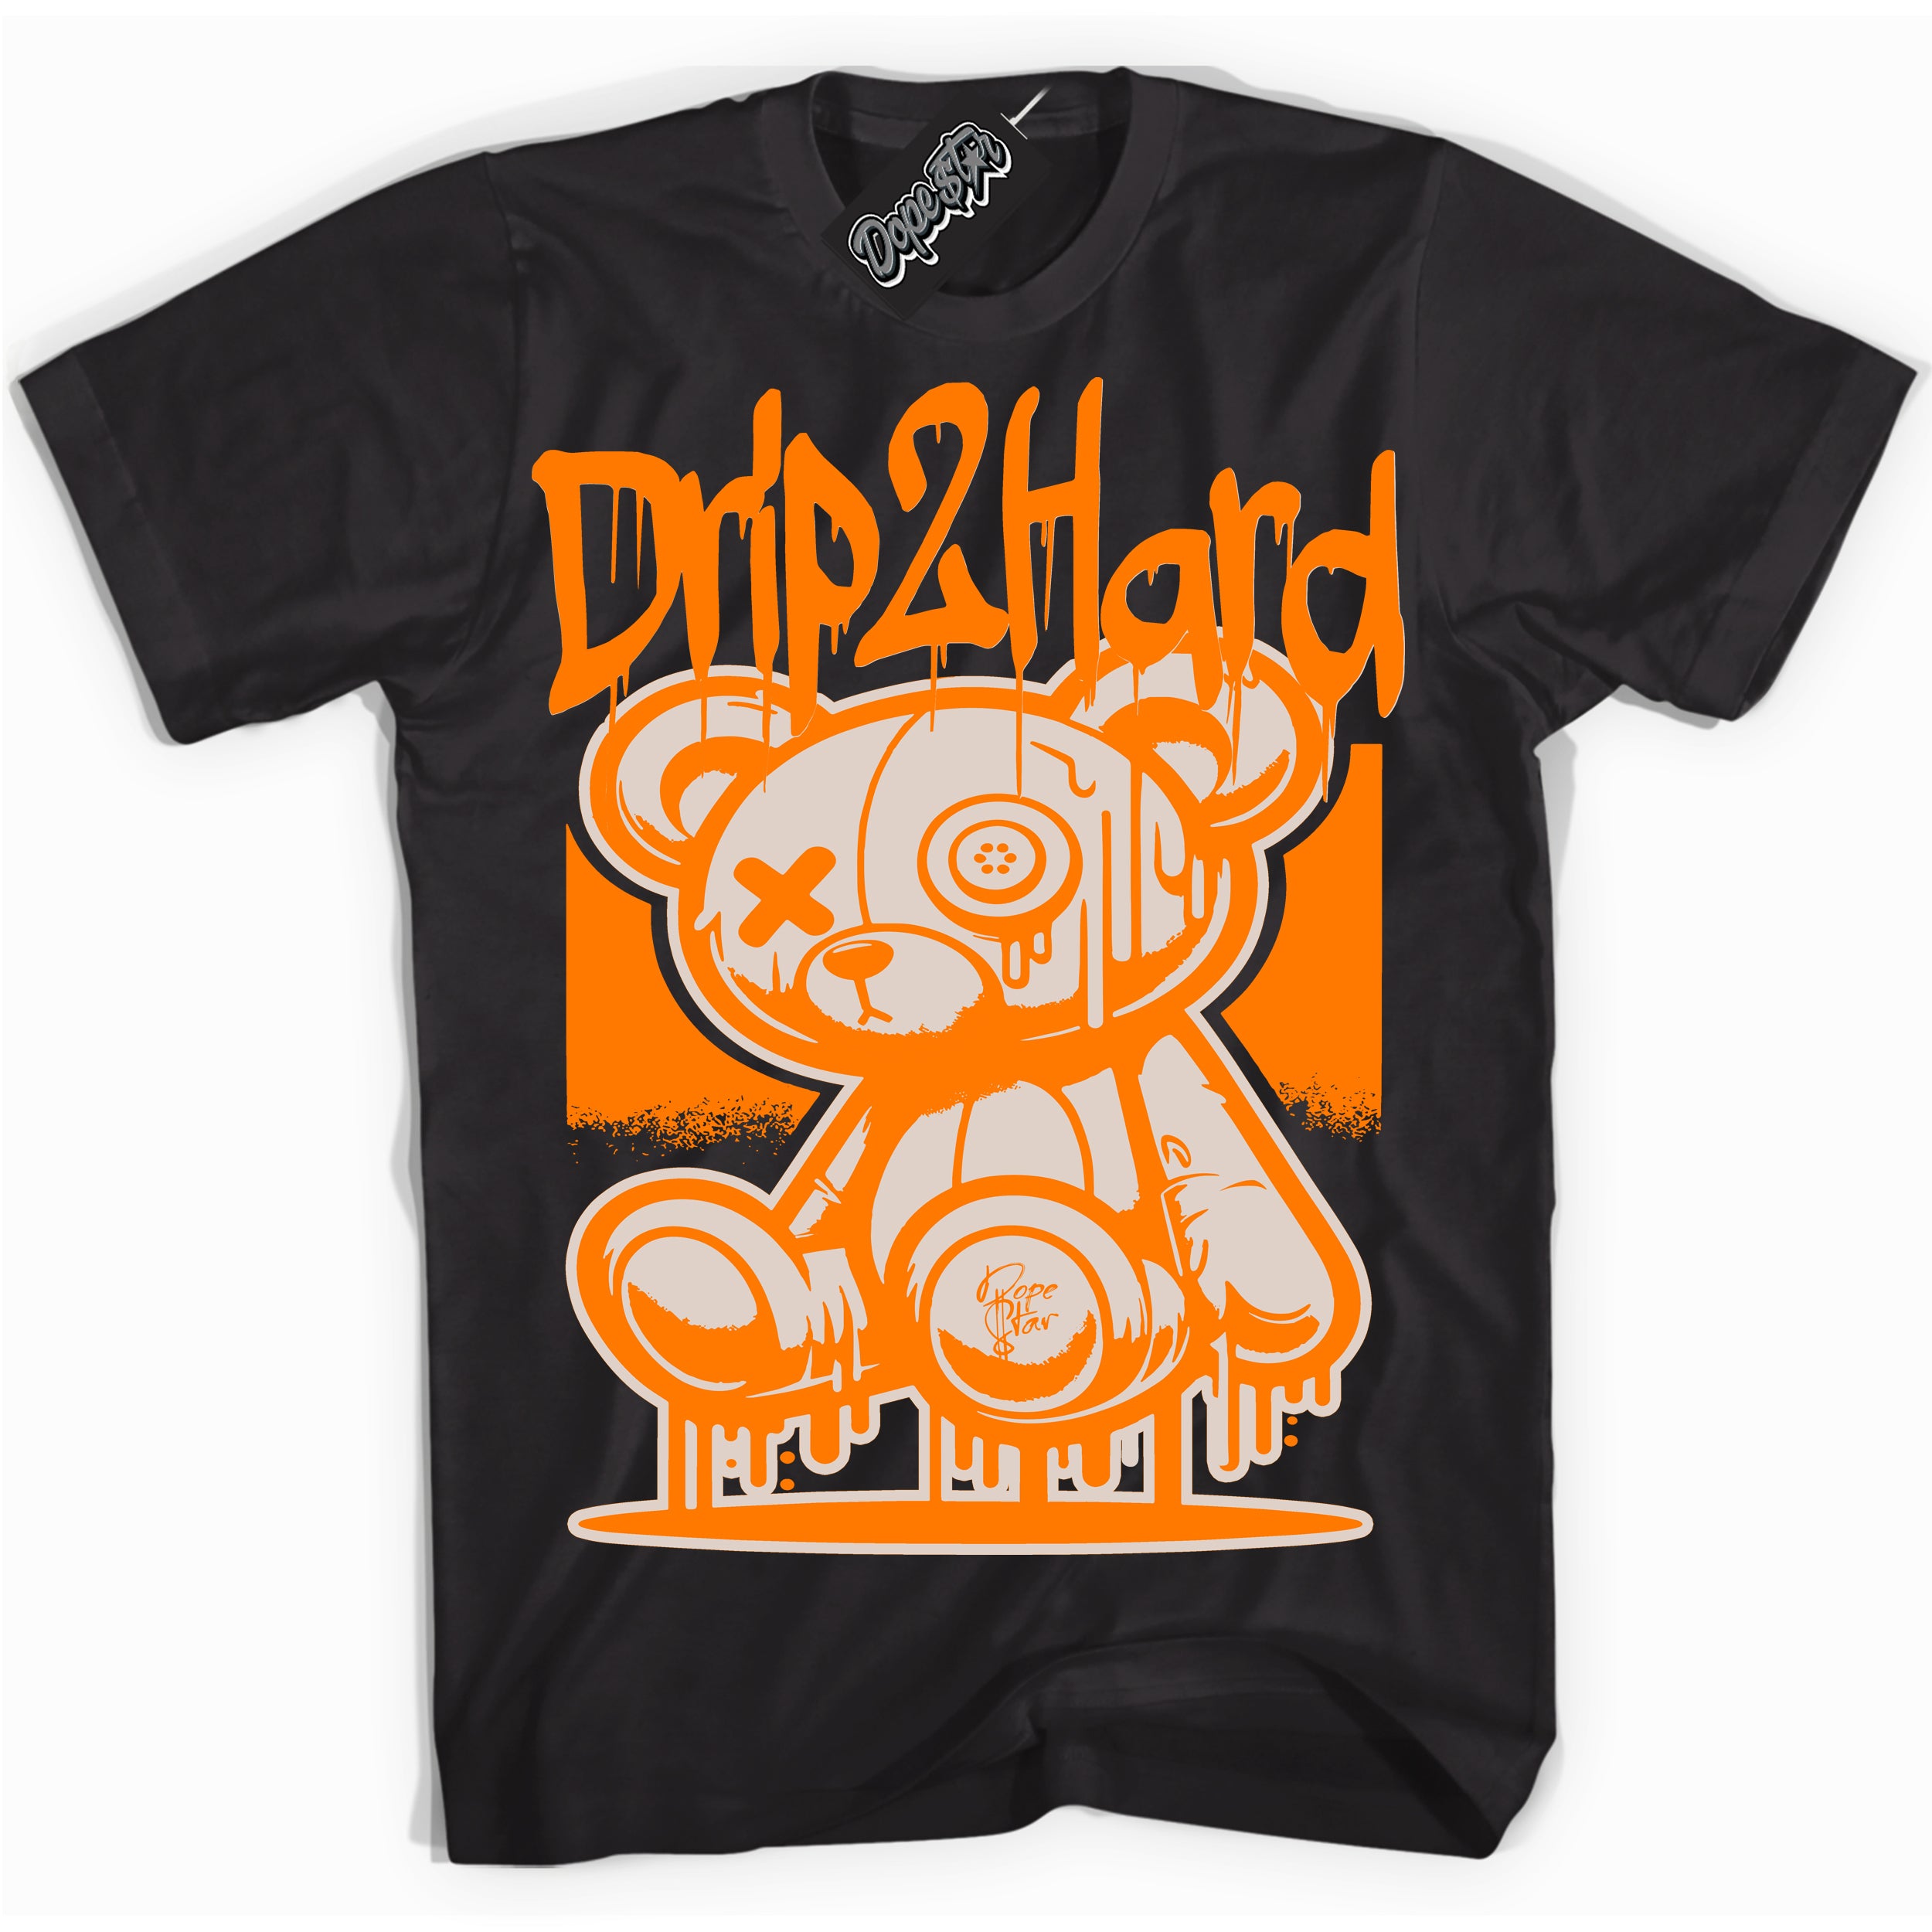 Cool Black graphic tee with “ Drip 2 Hard ” design, that perfectly matches Peach Cream